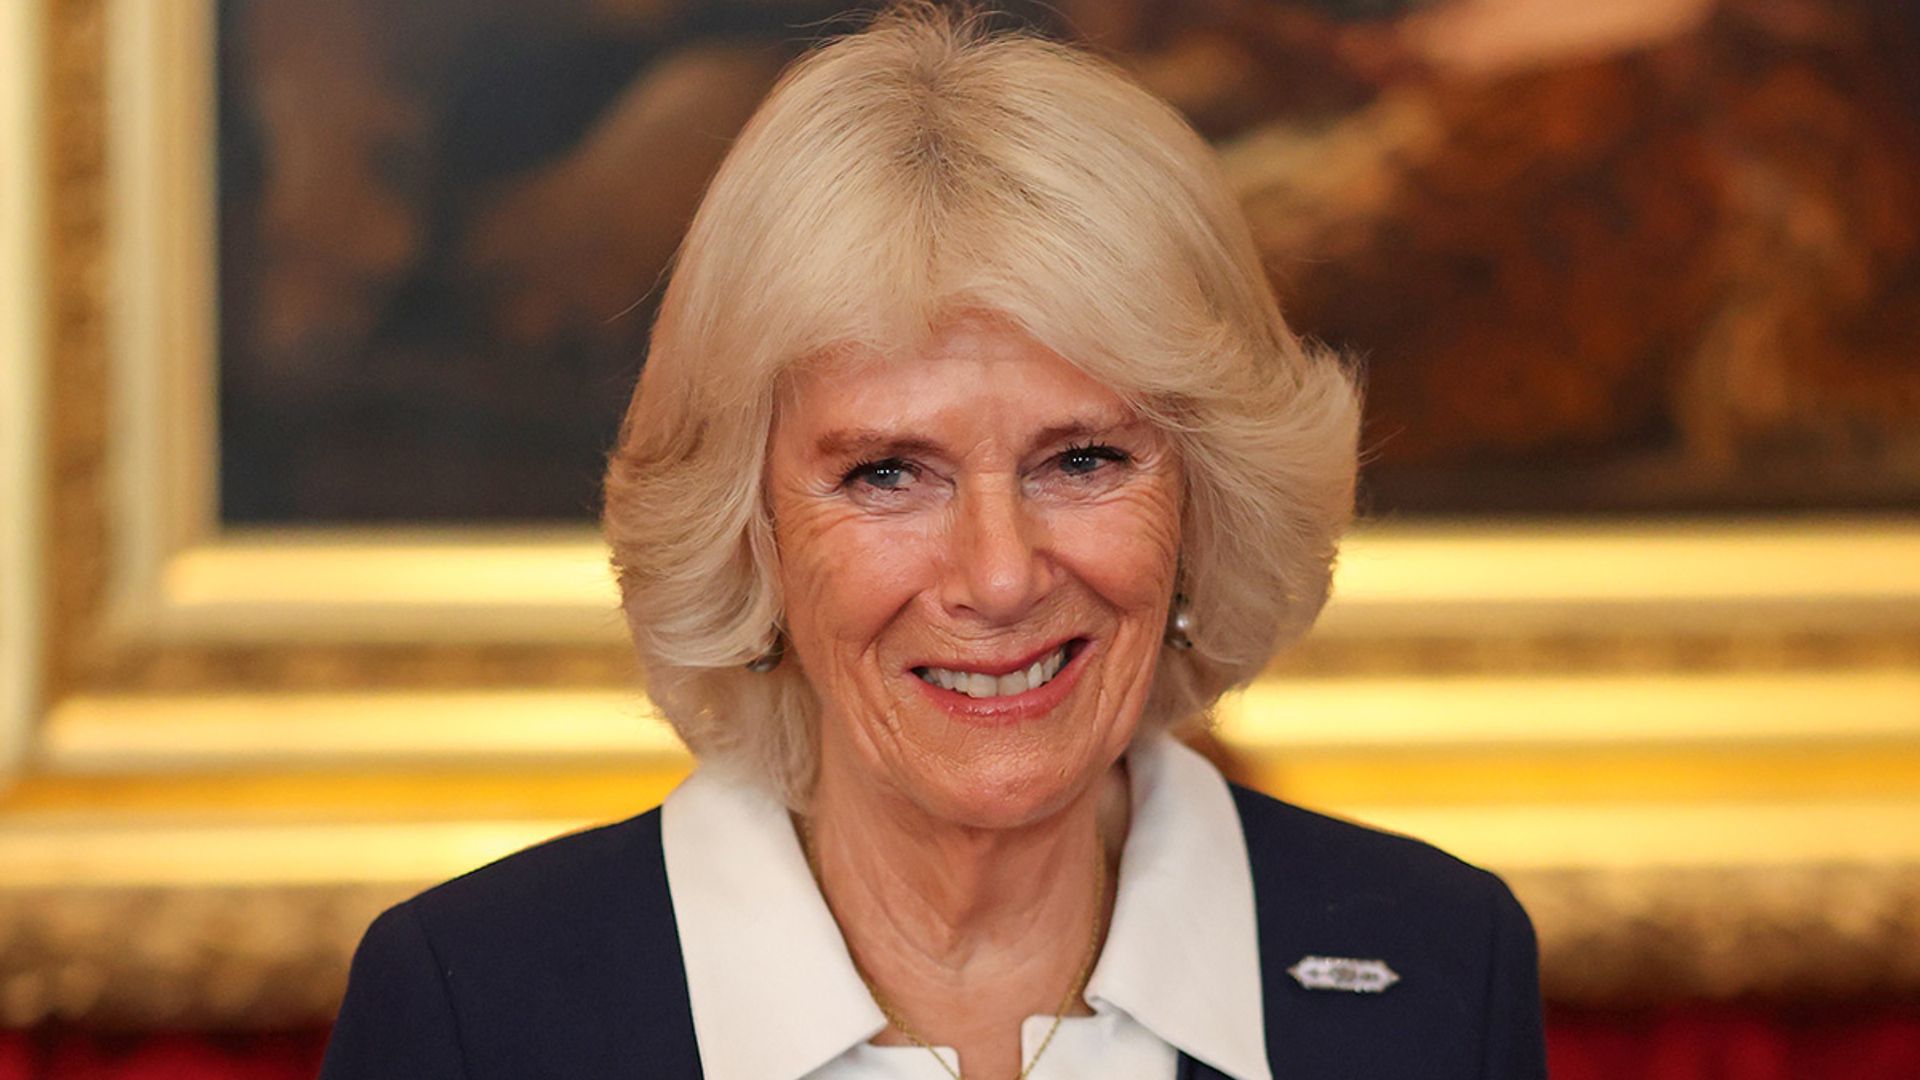 This anecdote about the Duchess of Cornwall shows just how down-to-earth she is